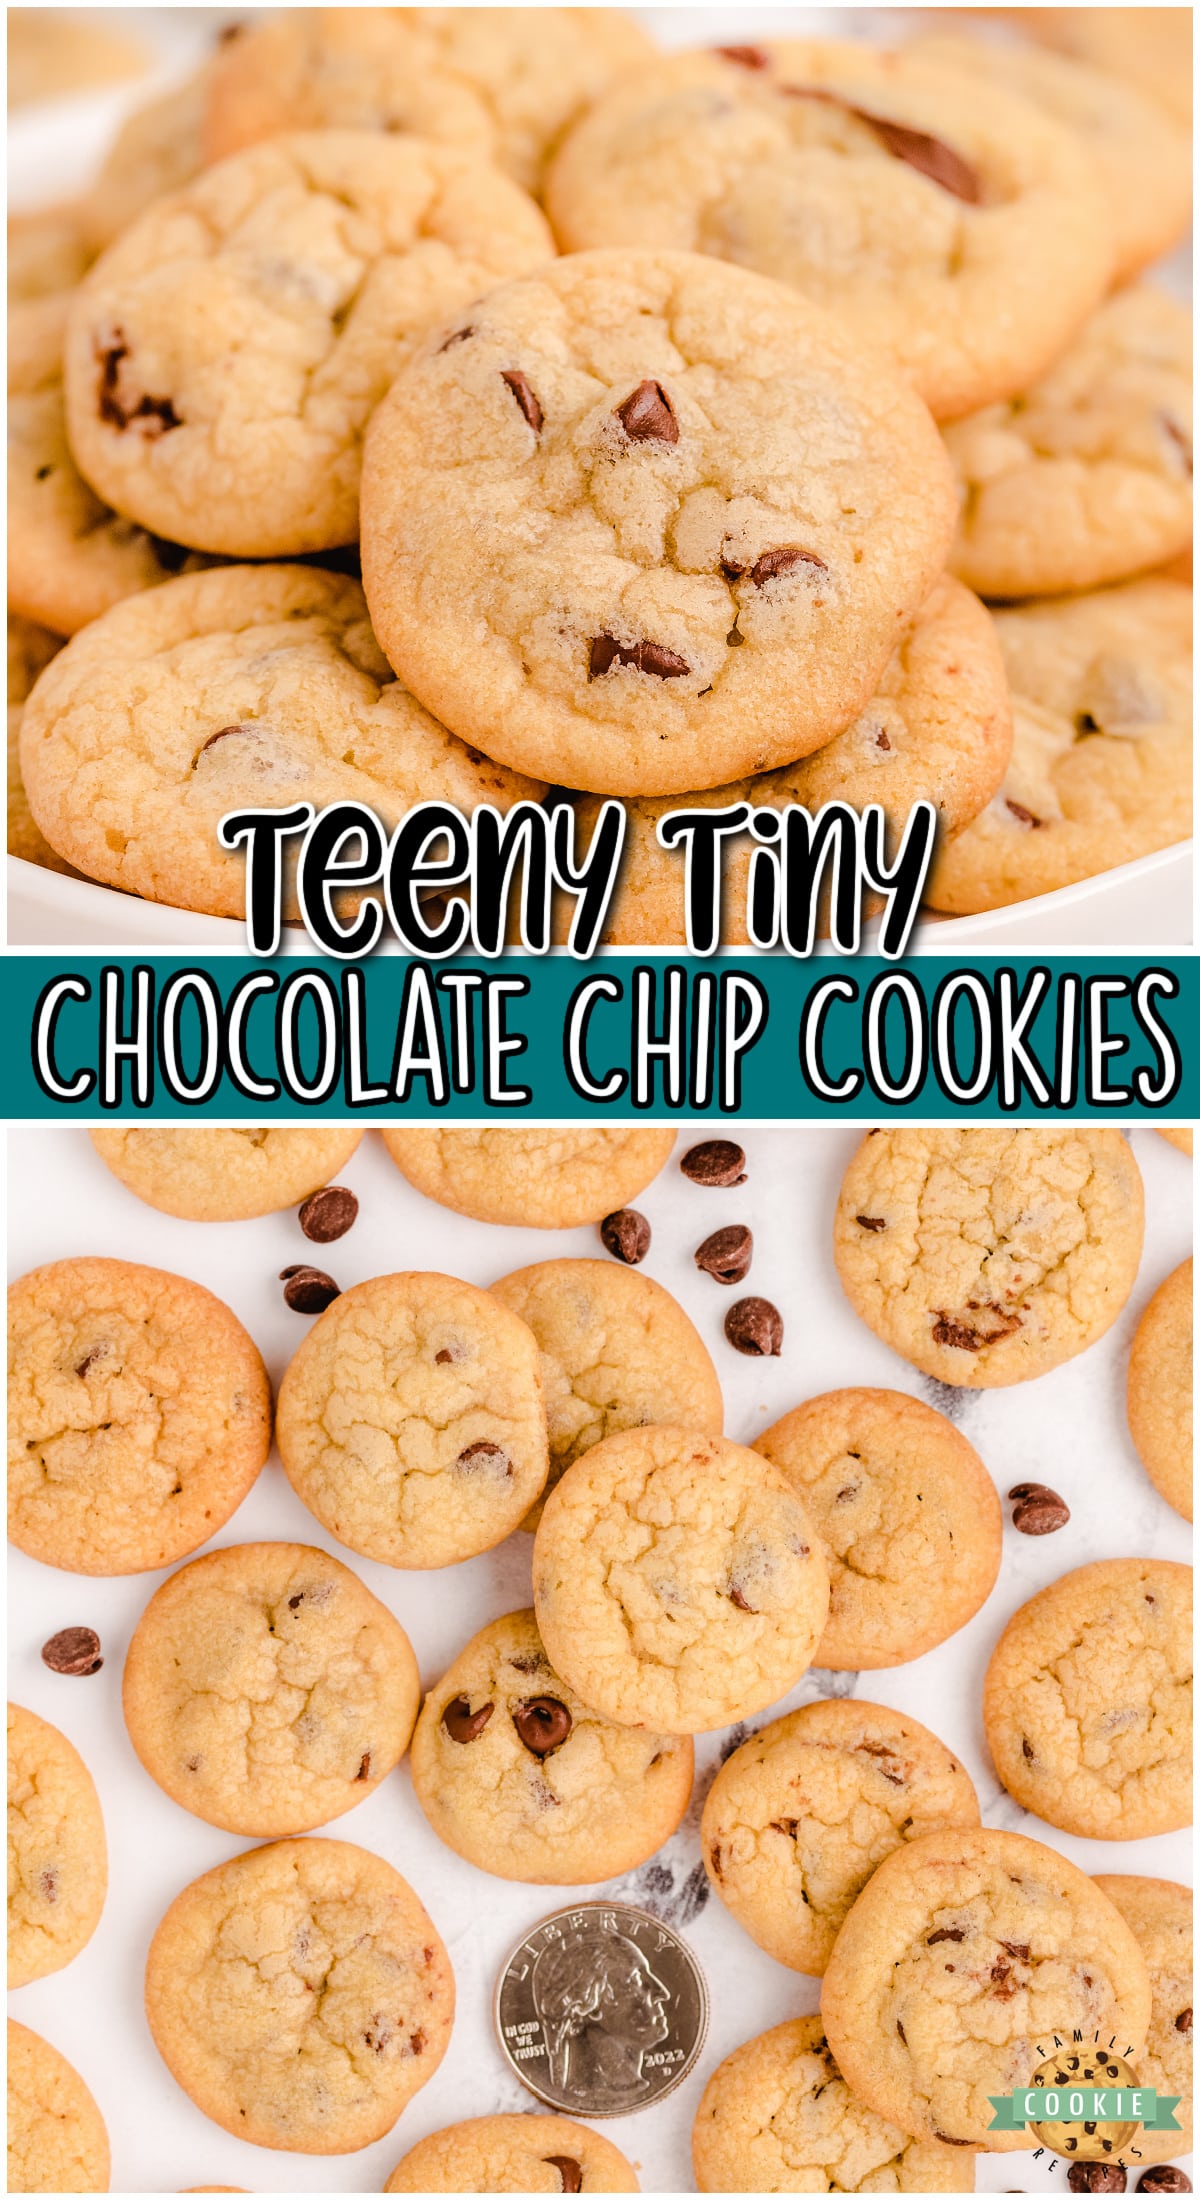 Mini Chocolate Chip Cookies are teeny tiny chocolate chip cookies the size of a quarter! Soft, chewy poppable cookies perfect for parties!